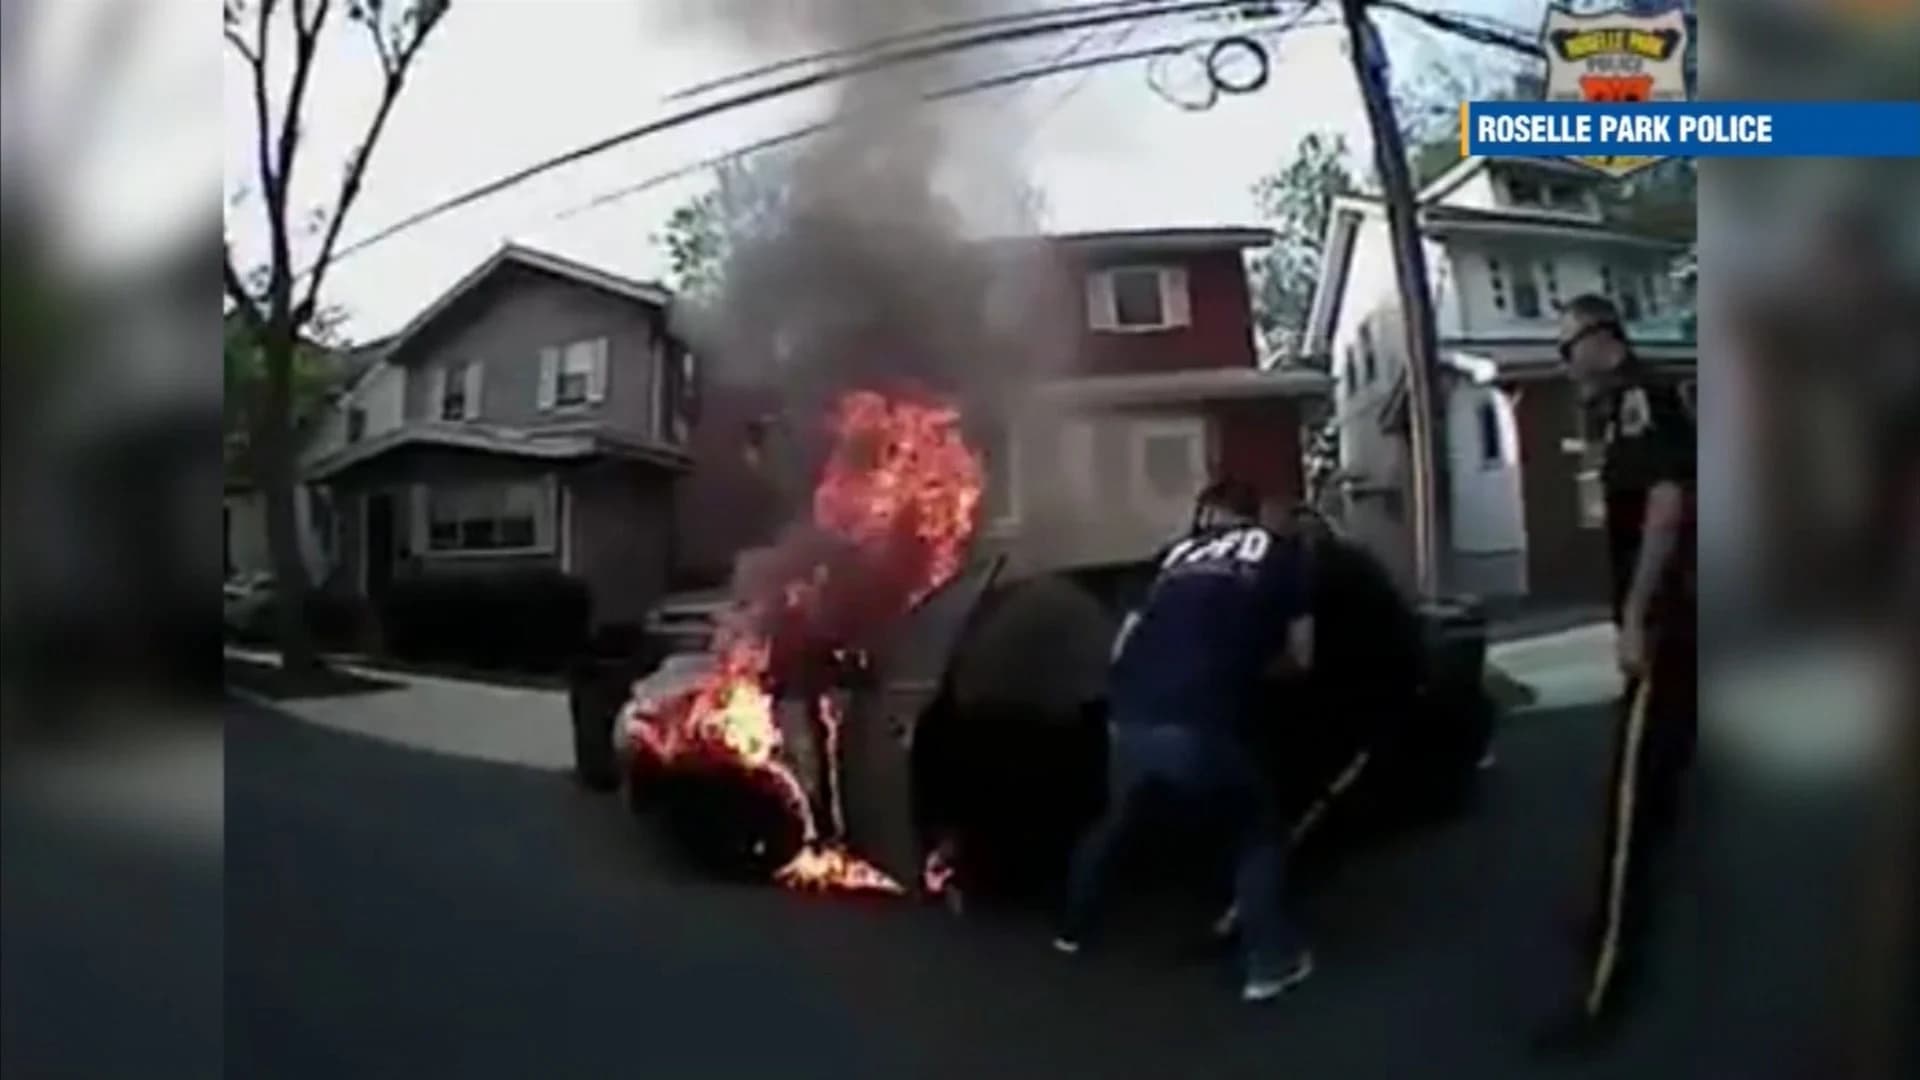 Roselle Park police save man from burning car after he fell asleep